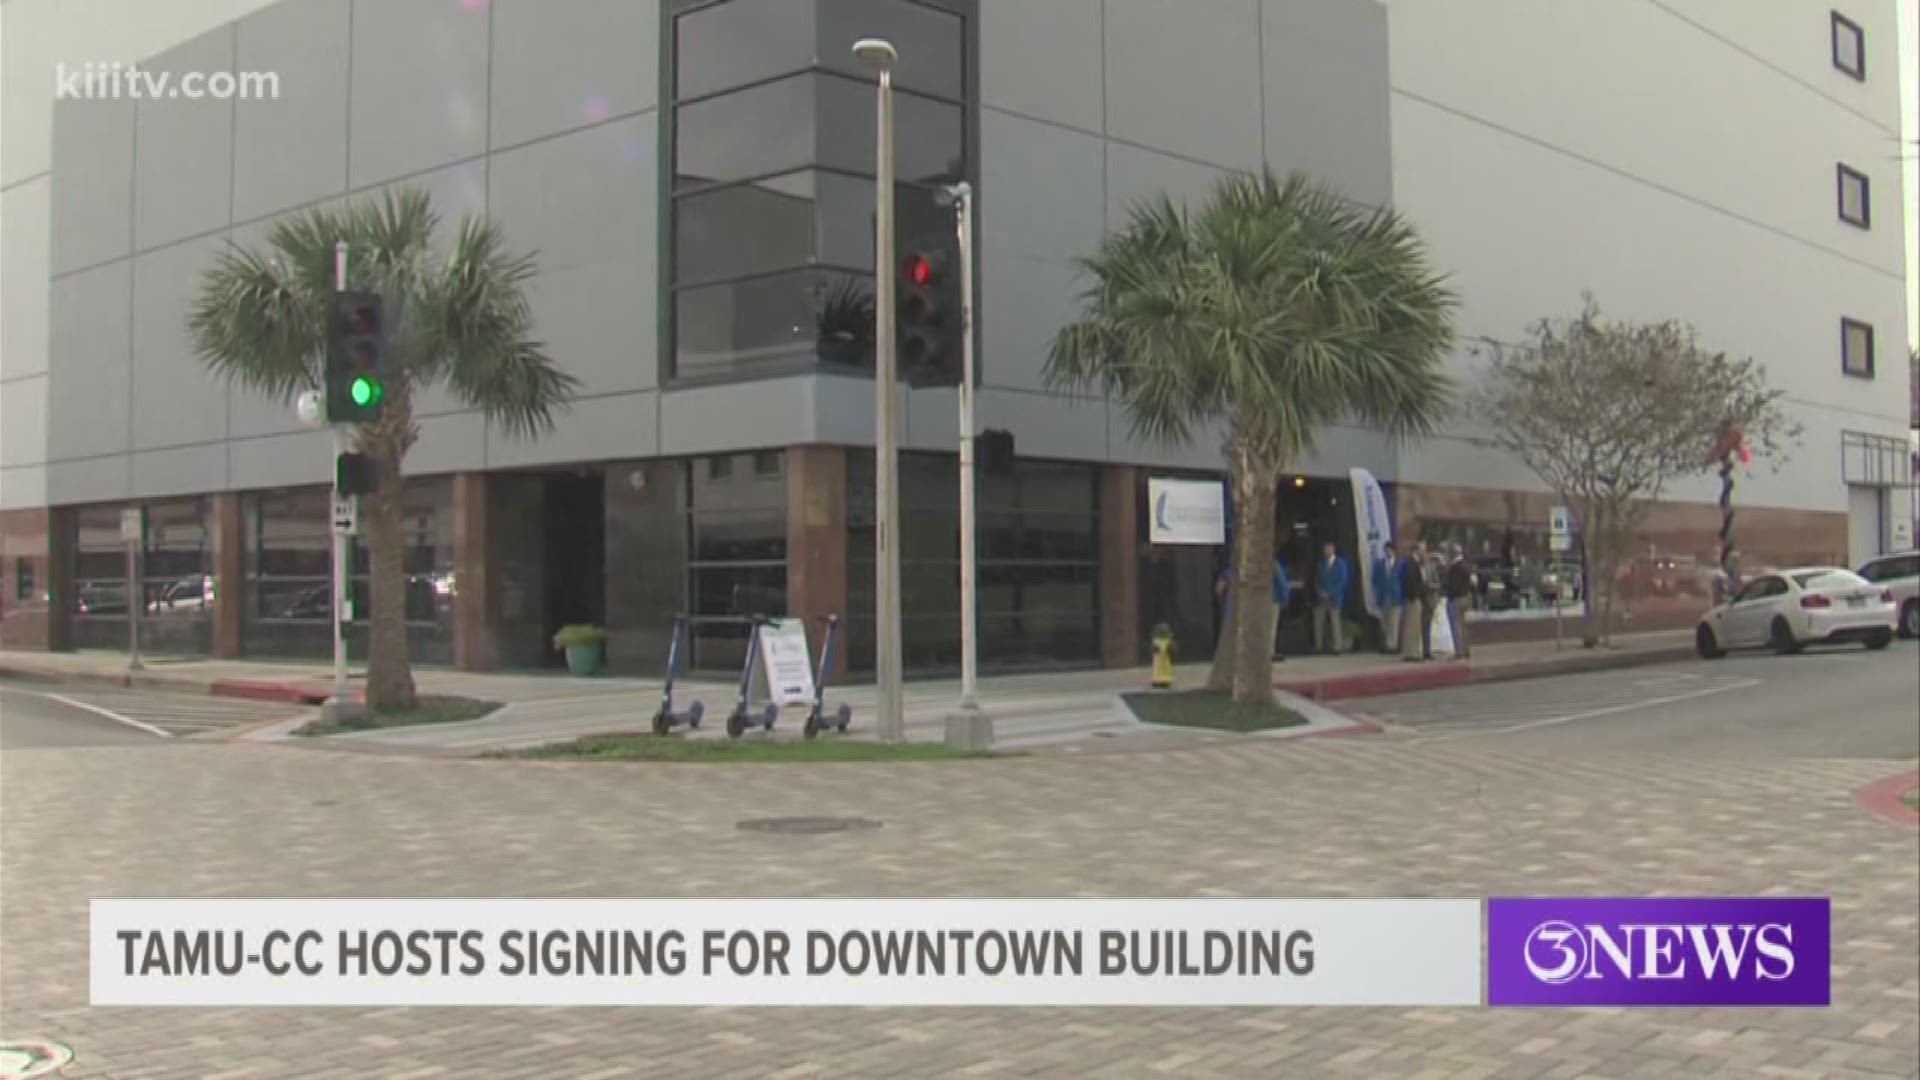 It was a historic day for Texas A&M University-Corpus Christi on Thursday as they celebrated the signing to purchase a building in the downtown area.